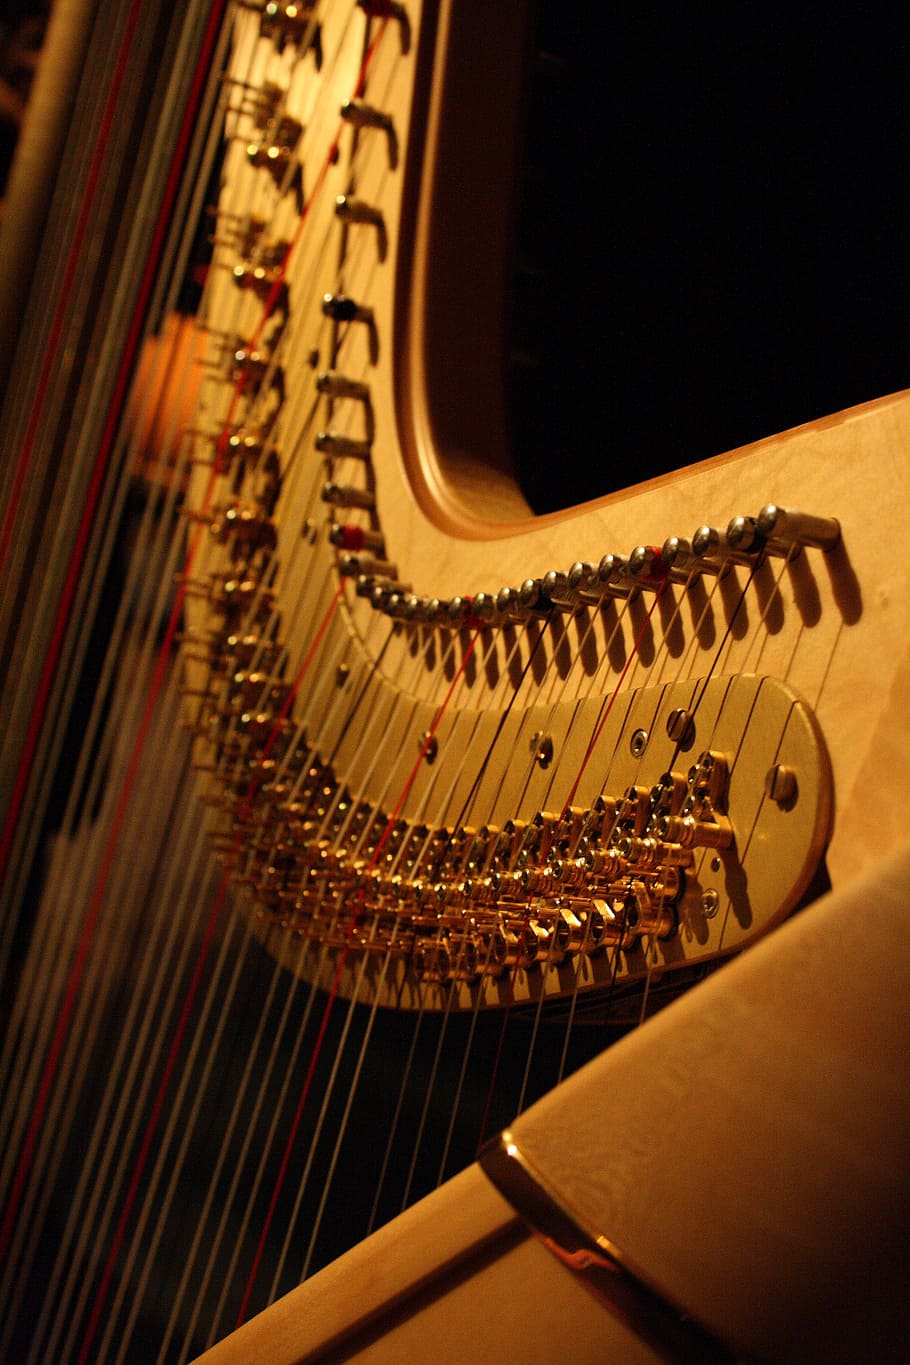 harp, music, musical instrument, musical equipment, string instrument, arts culture and entertainment, musical instrument string, indoors, string, close-up